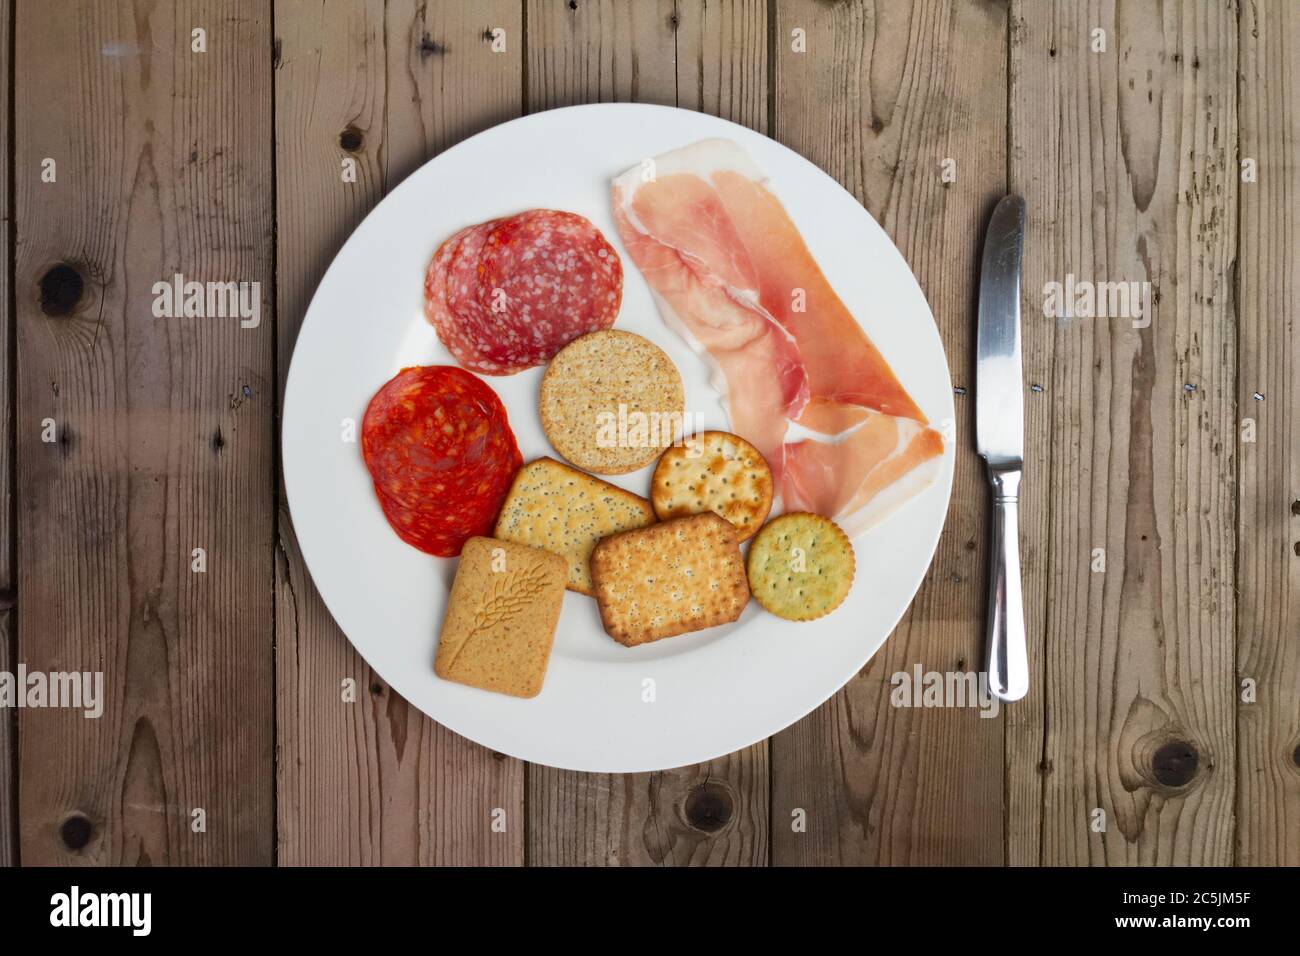 Plate of deli meats and salted biscuits Stock Photo